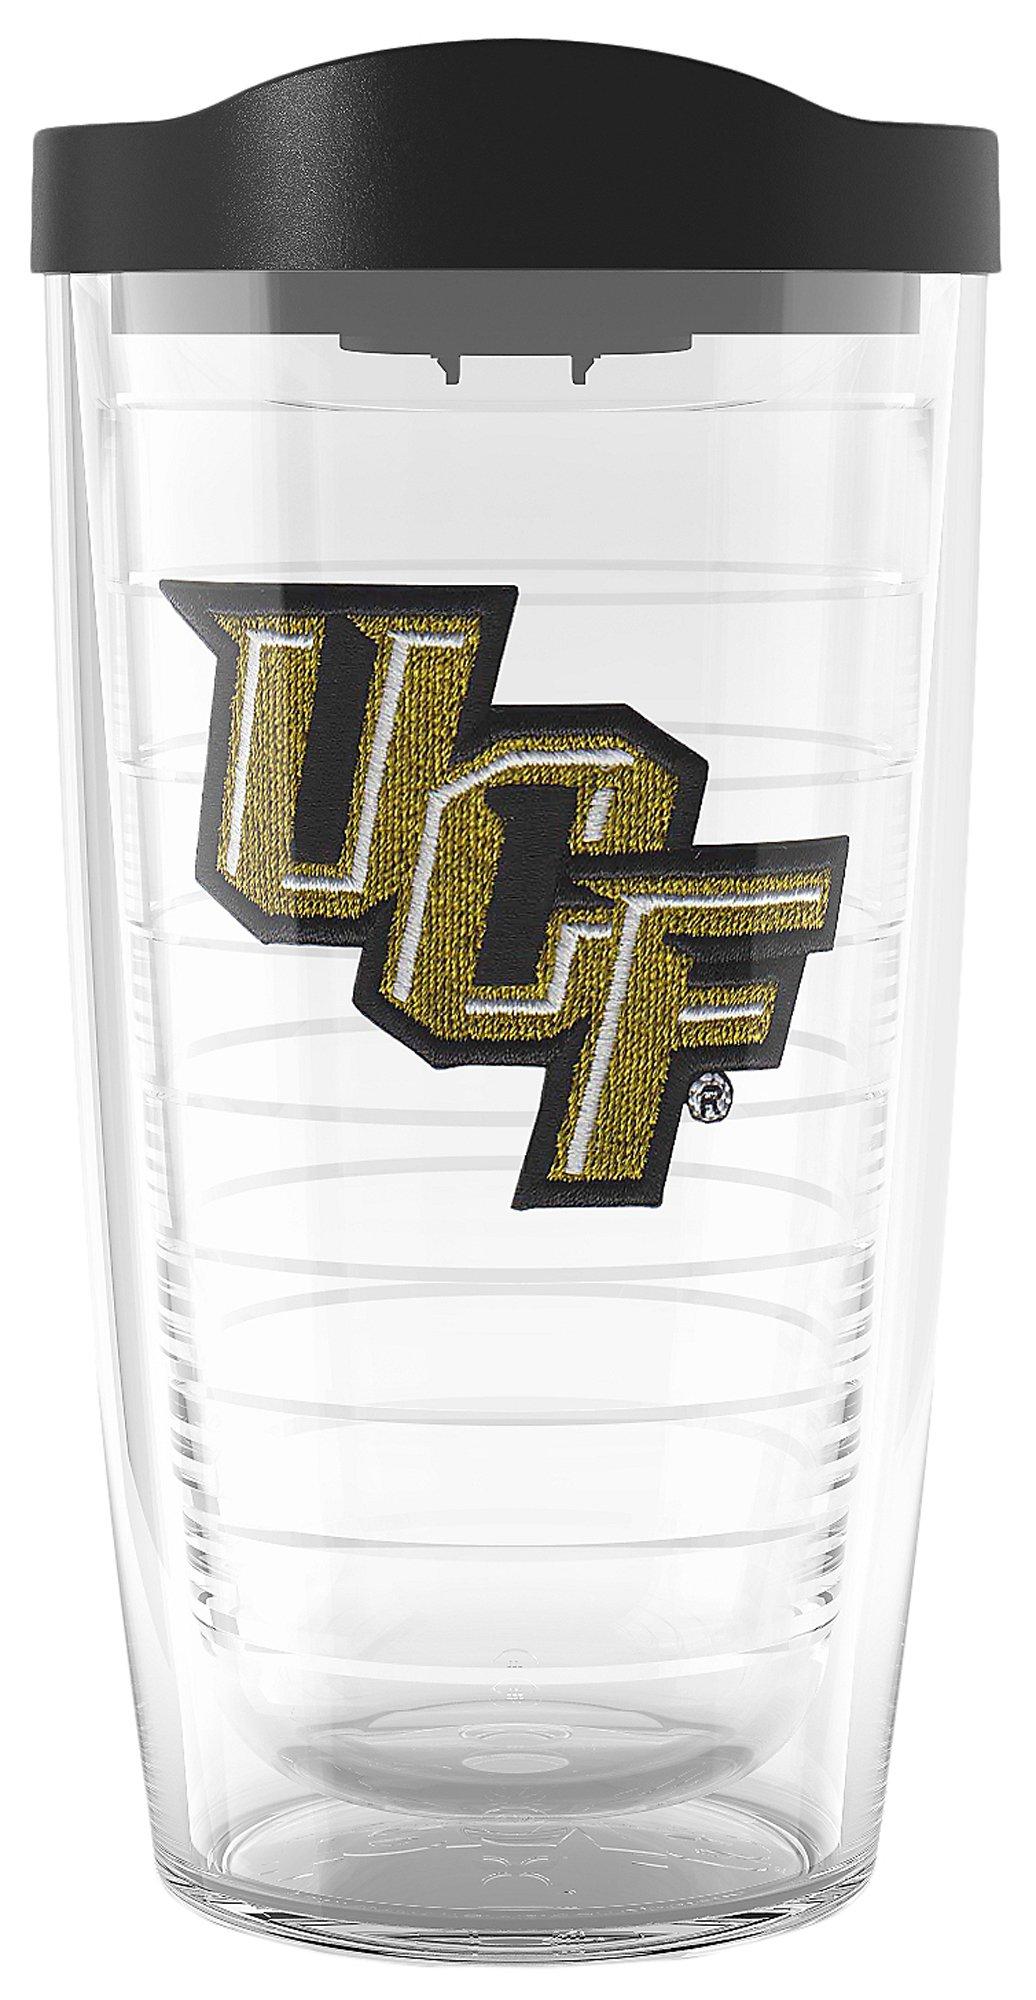 Tervis 16 oz. UCF Golden Knights Tumbler With Lid